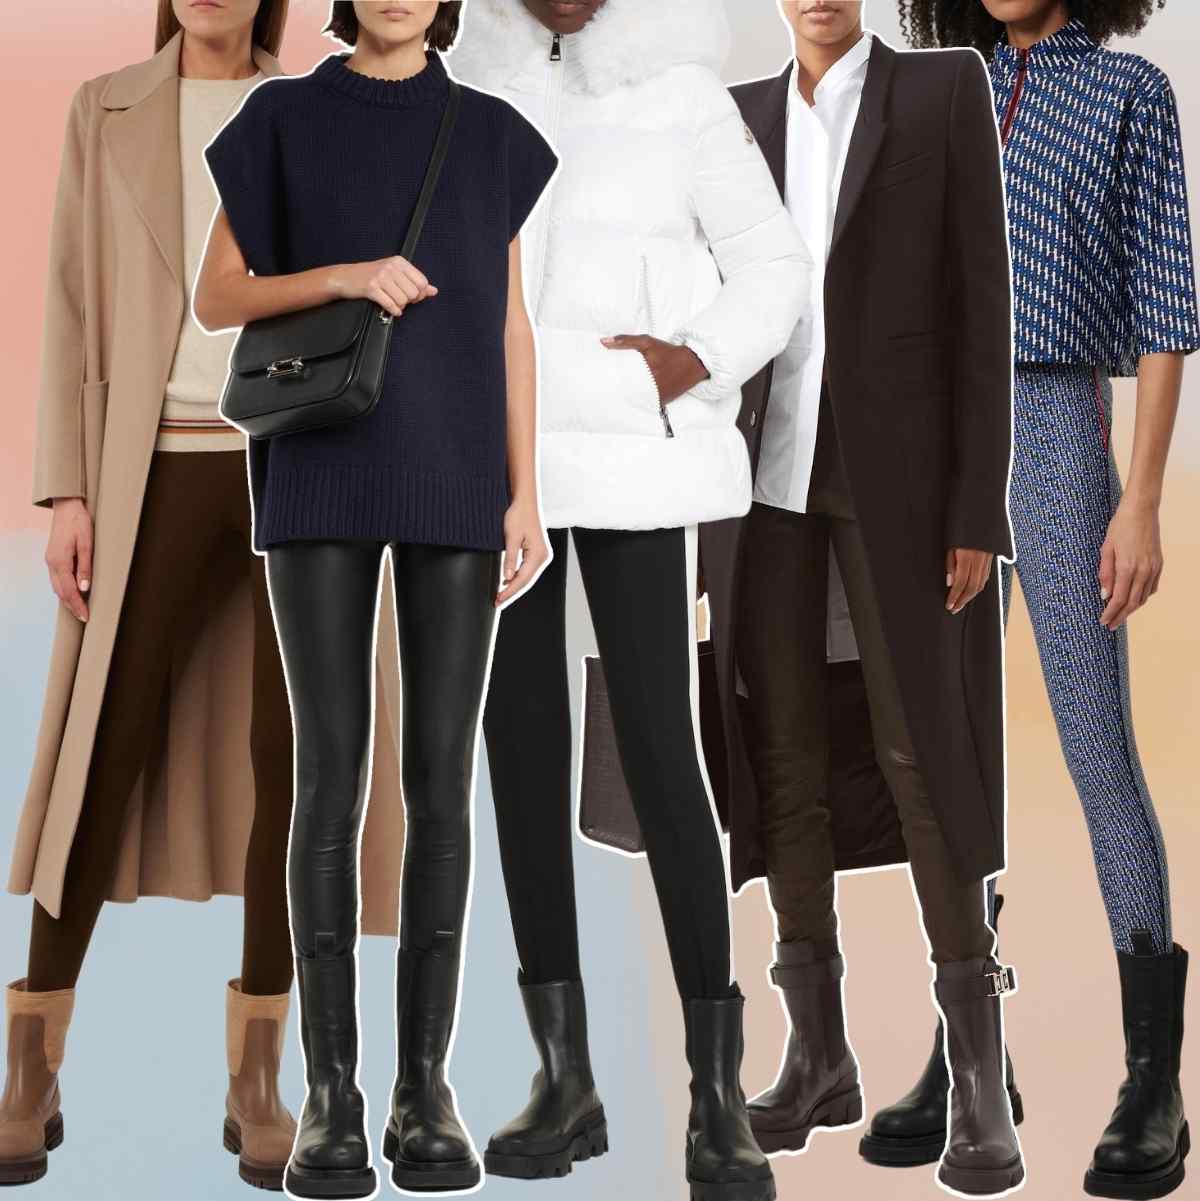 Collage of 5 women wearing different Chelsea boots with leggings outfits.